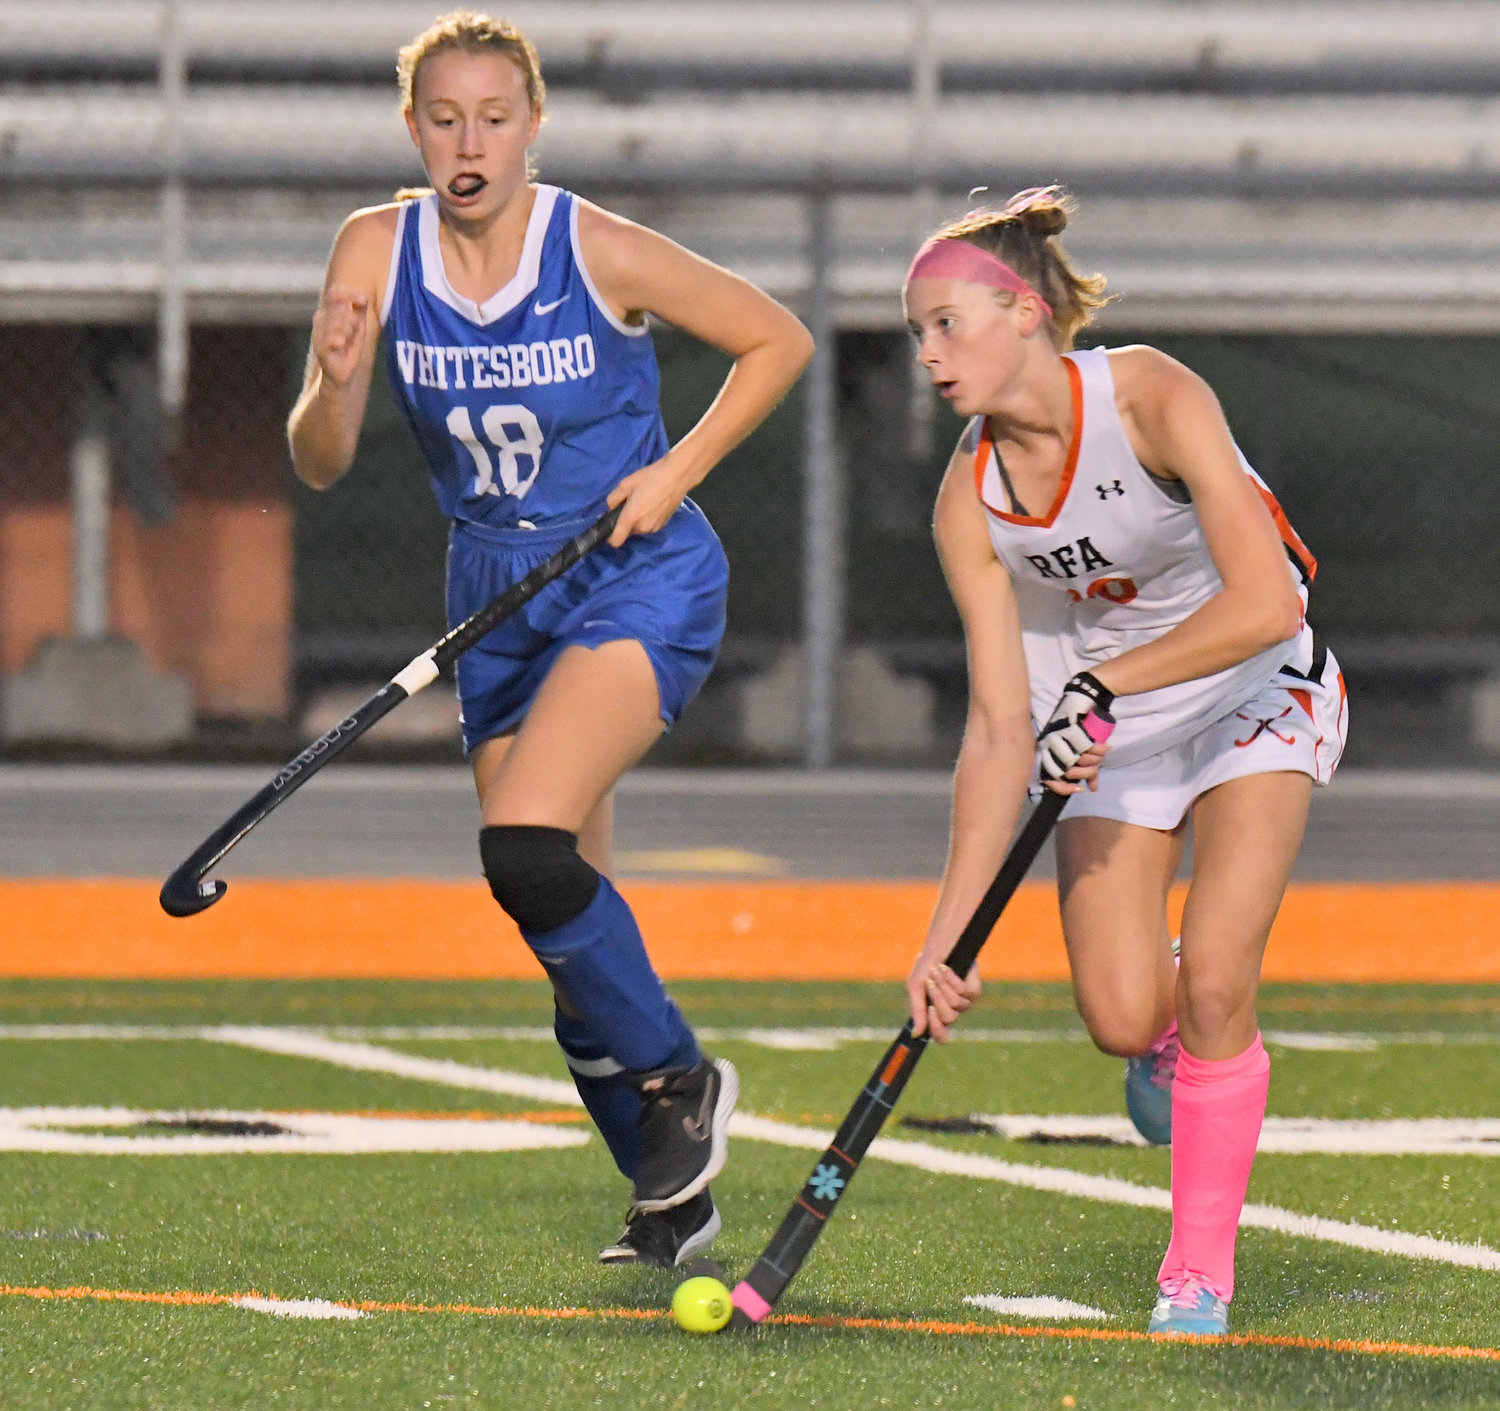 Rome Free Academy's Fiona McMahon looks downfield with Whitesboro's Riley Collis in pursuit in the first half at RFA Stadium Wednesday night. RFA won 8-0 and McMahon had one of the goals.